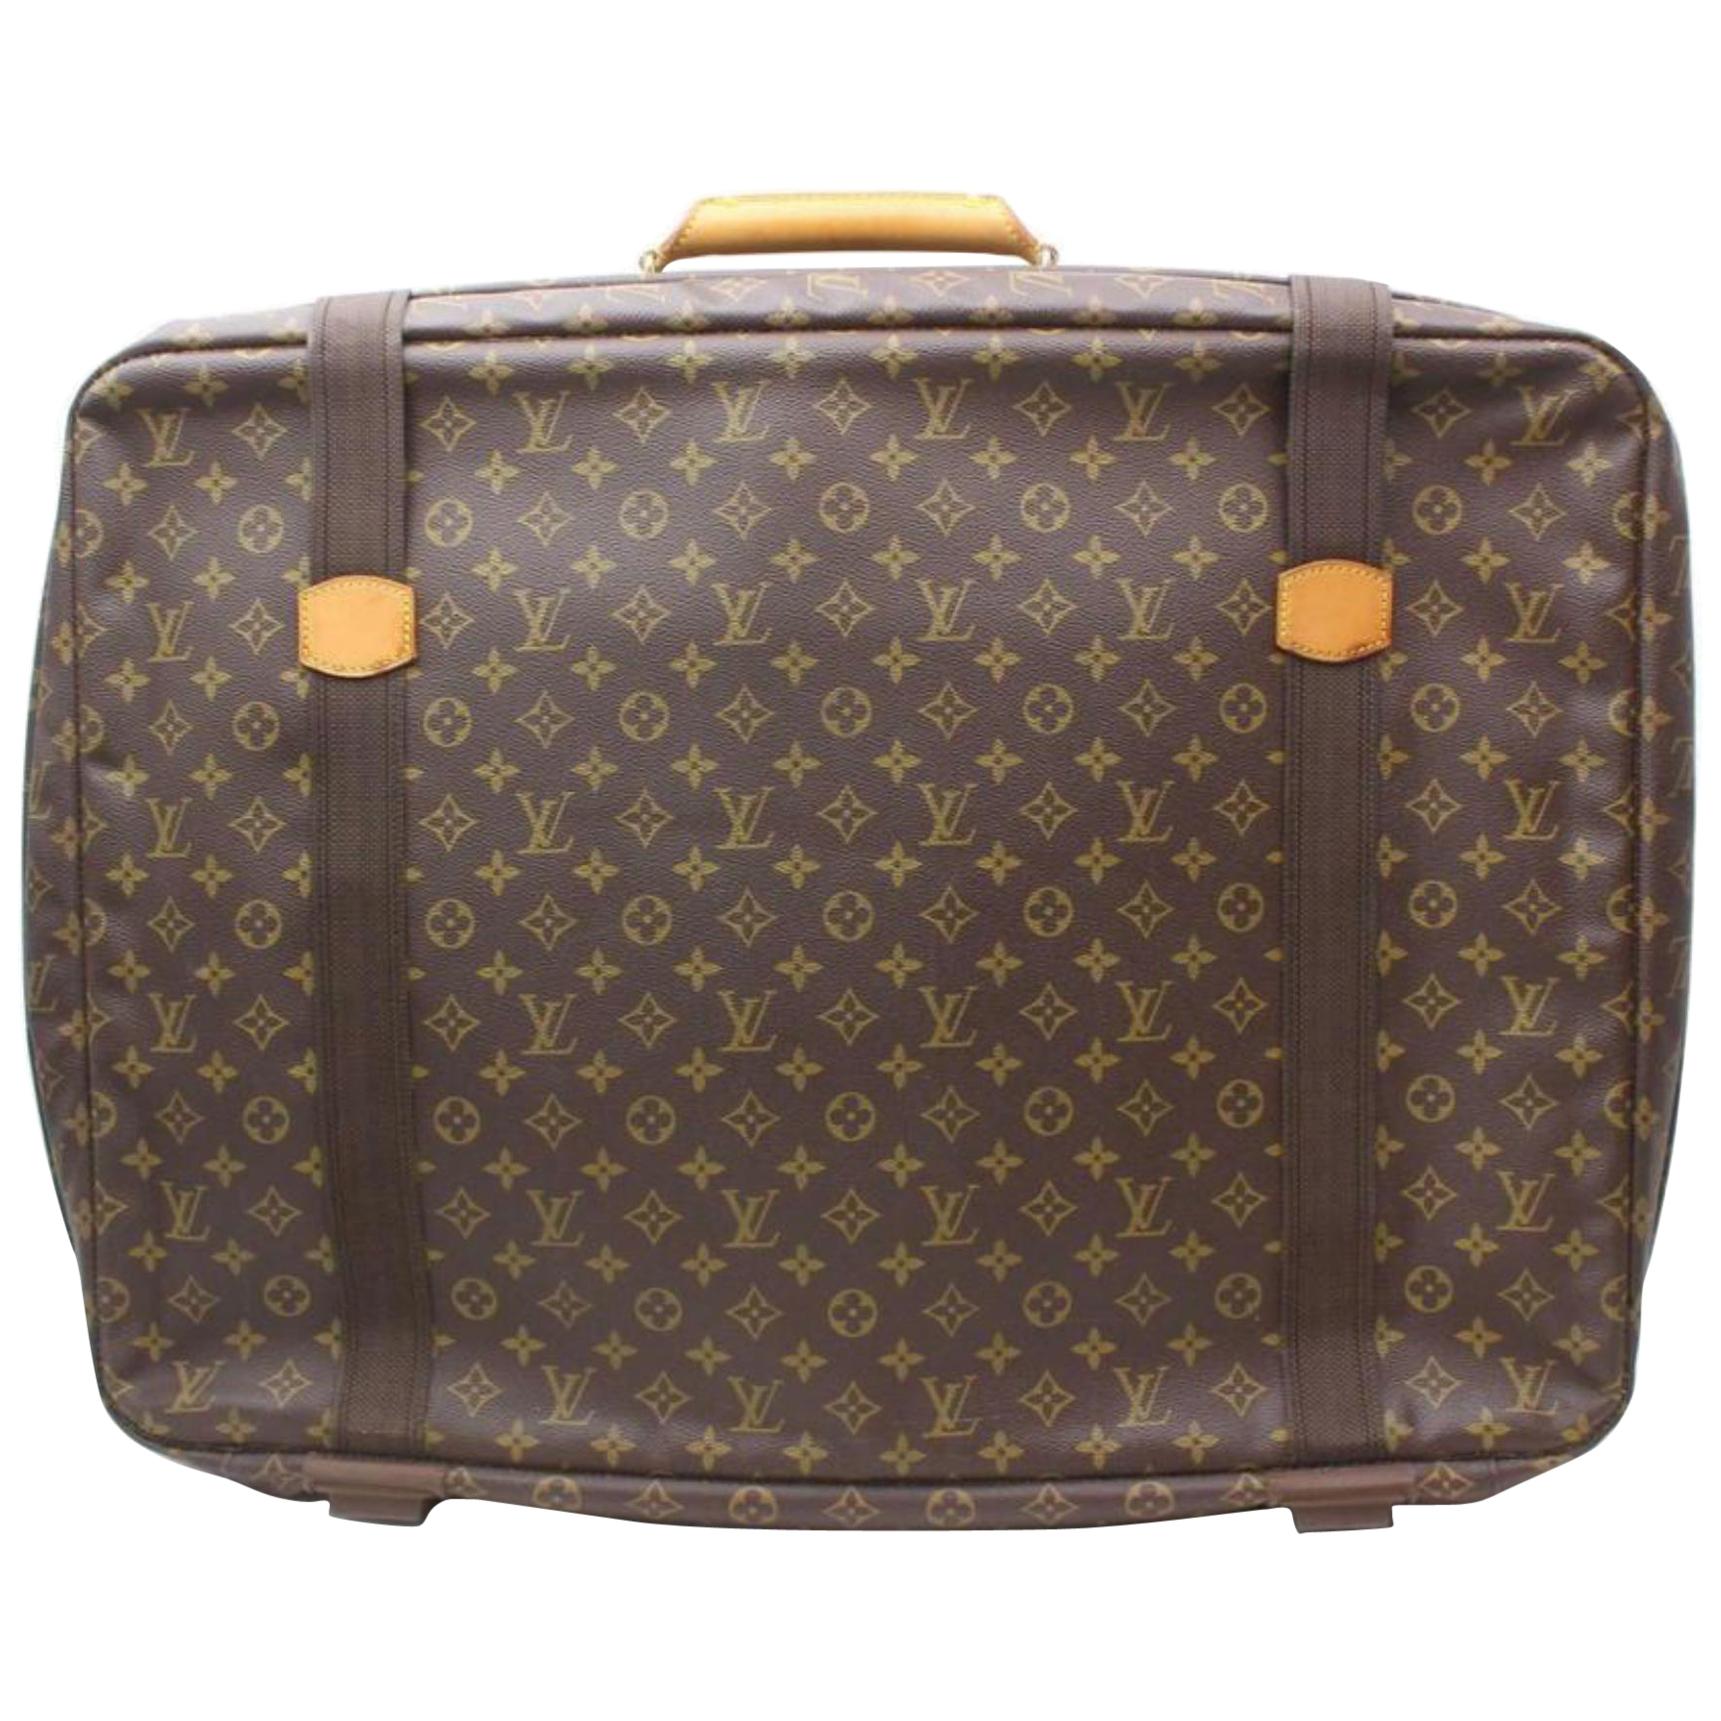 Louis Vuitton Large Satellite 65 Suitcase Luggage 870108 Brown Canvas Travel Bag For Sale